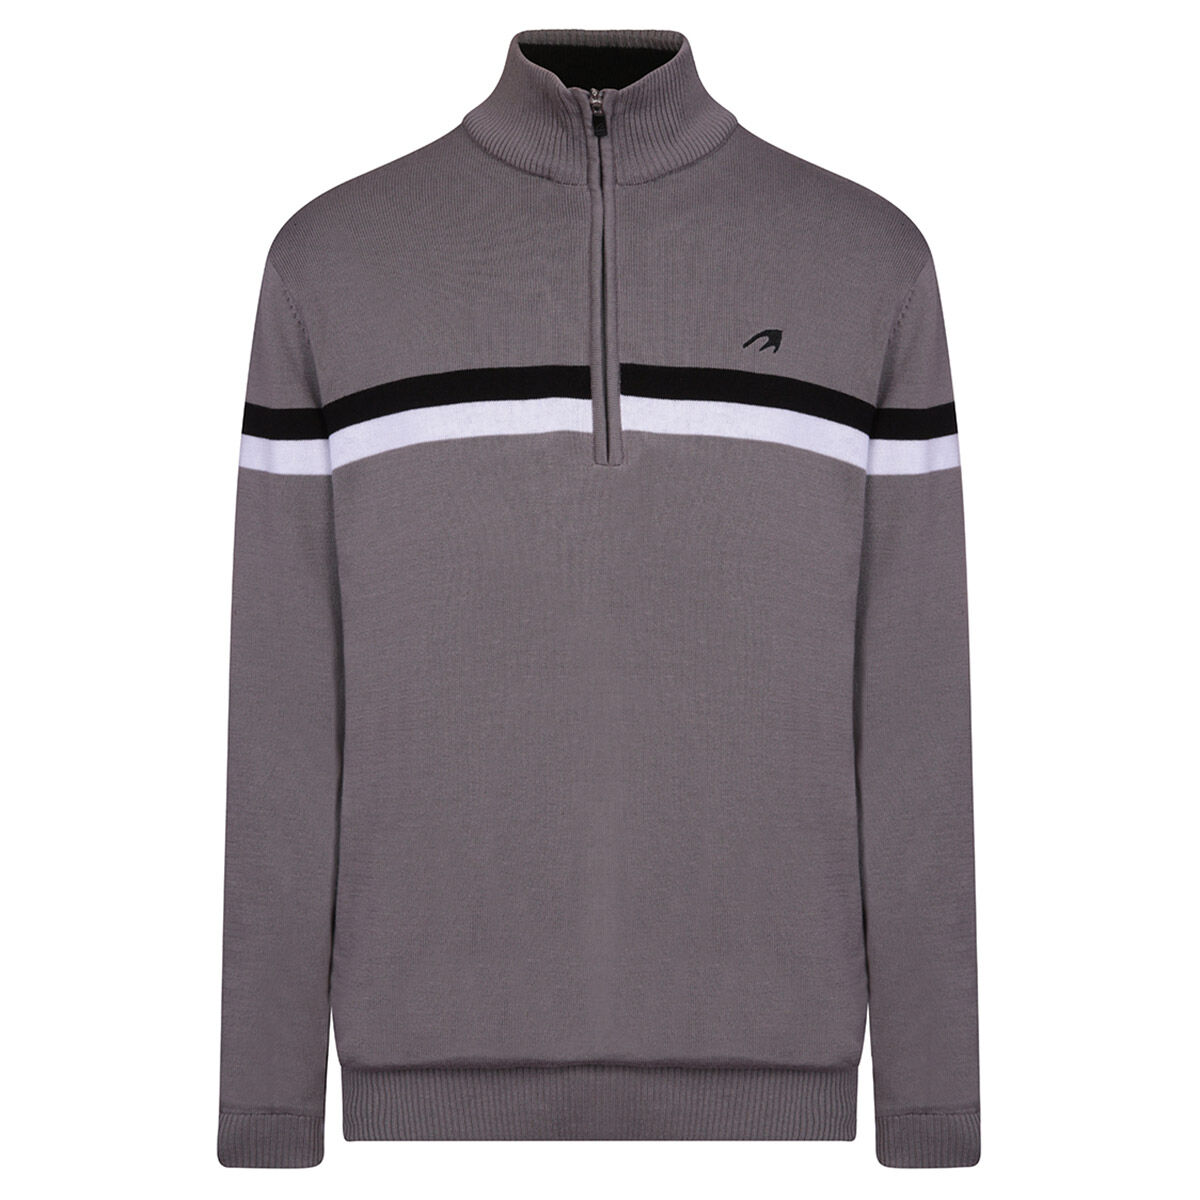 Benross Mens Grey And Black Knitted Lined Golf Midlayer, Size: Small | American Golf von Benross